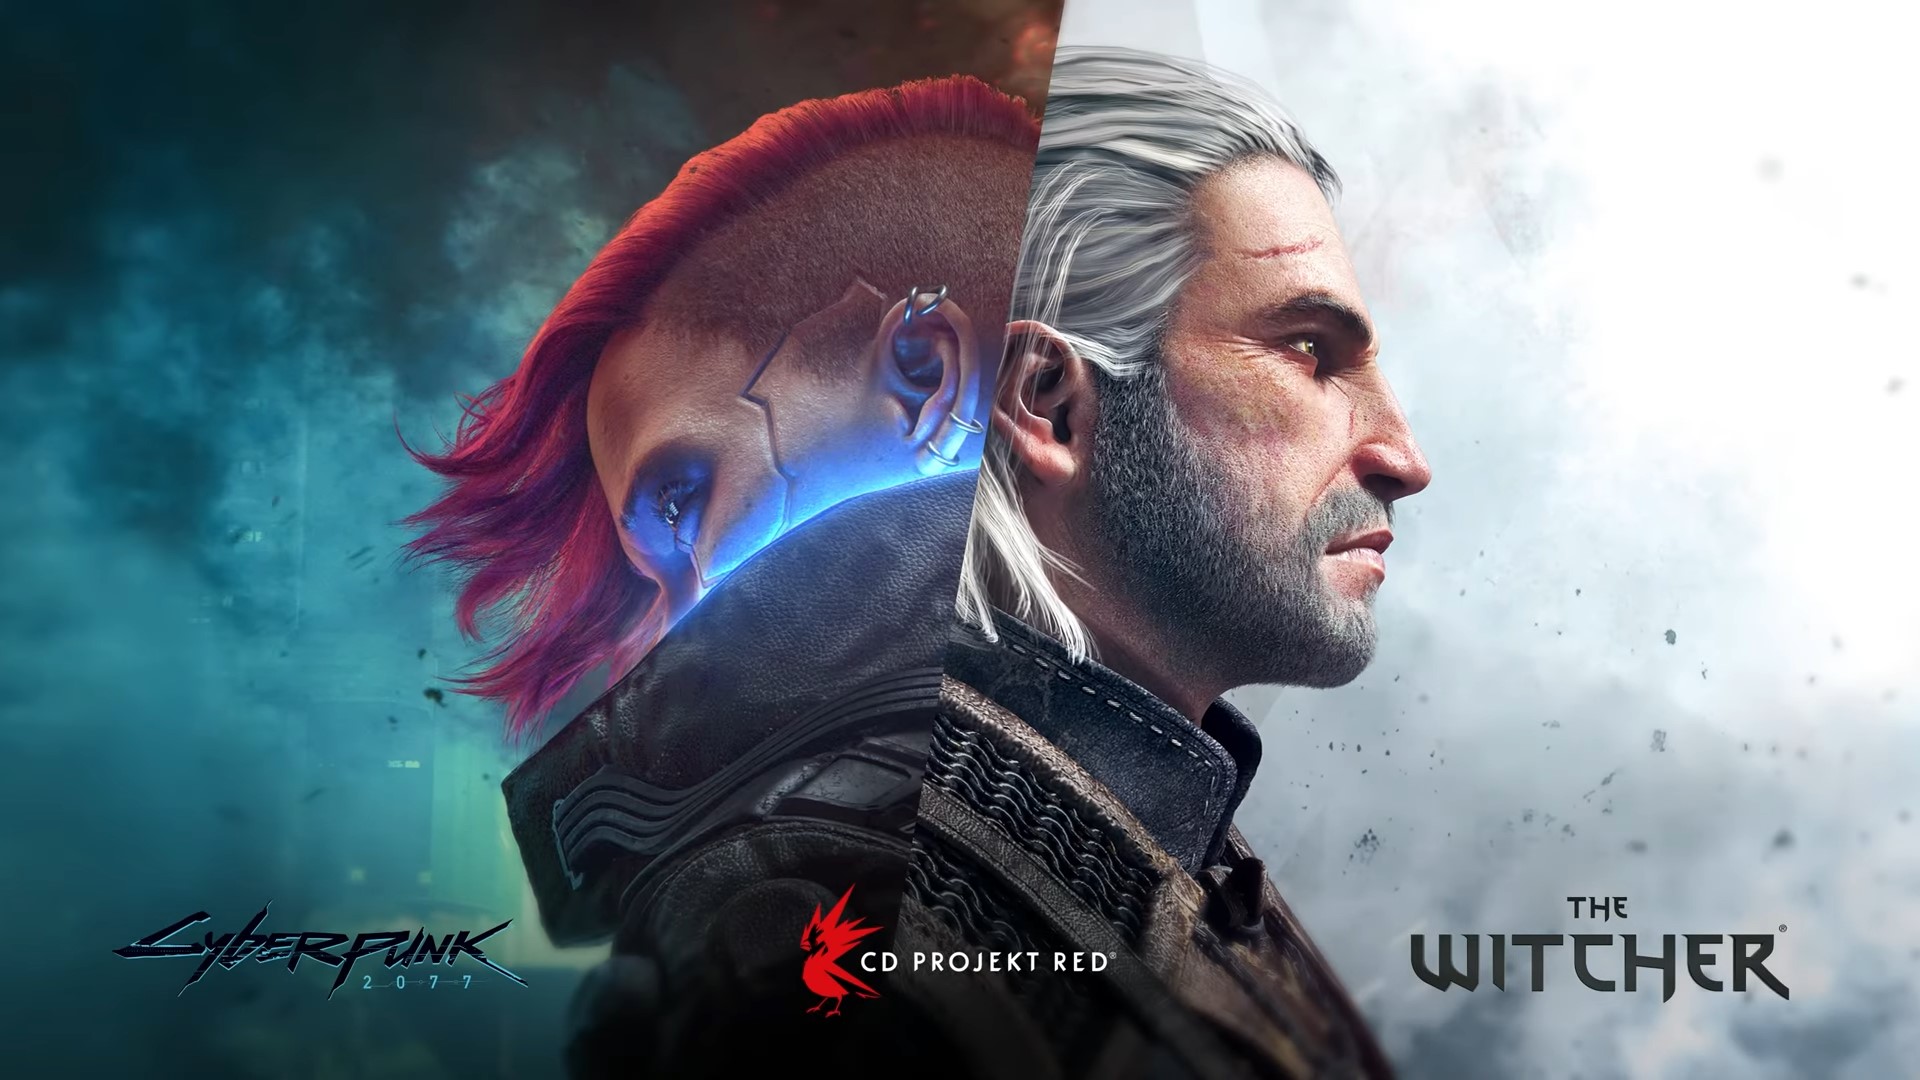 CD Projekt RED has announced three The Witcher games, a sequel to Cyberpunk  2077, and a new IP